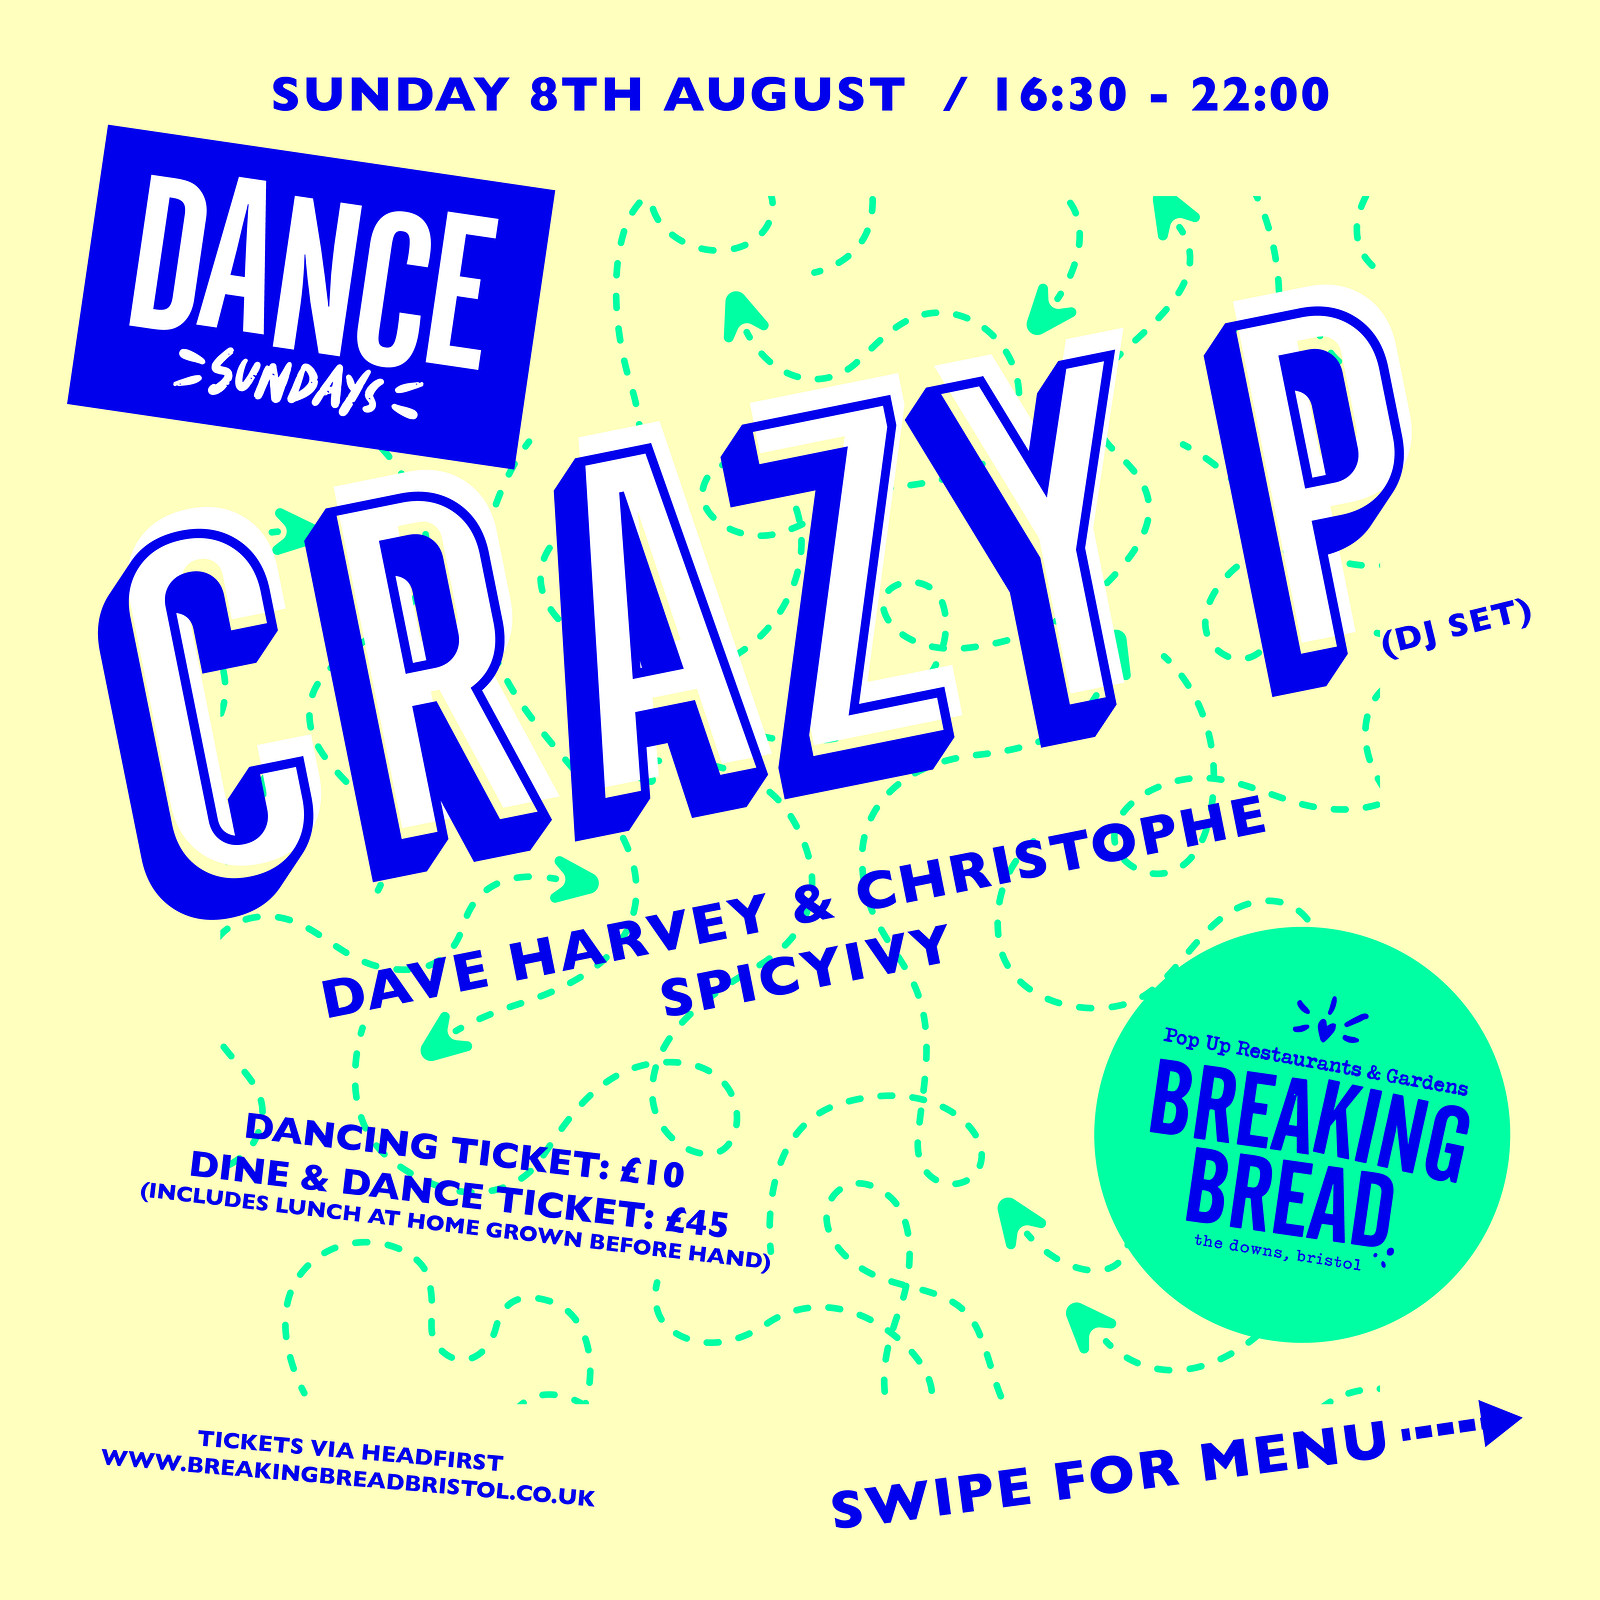 Dance Sundays: Crazy P  + more at Breaking Bread